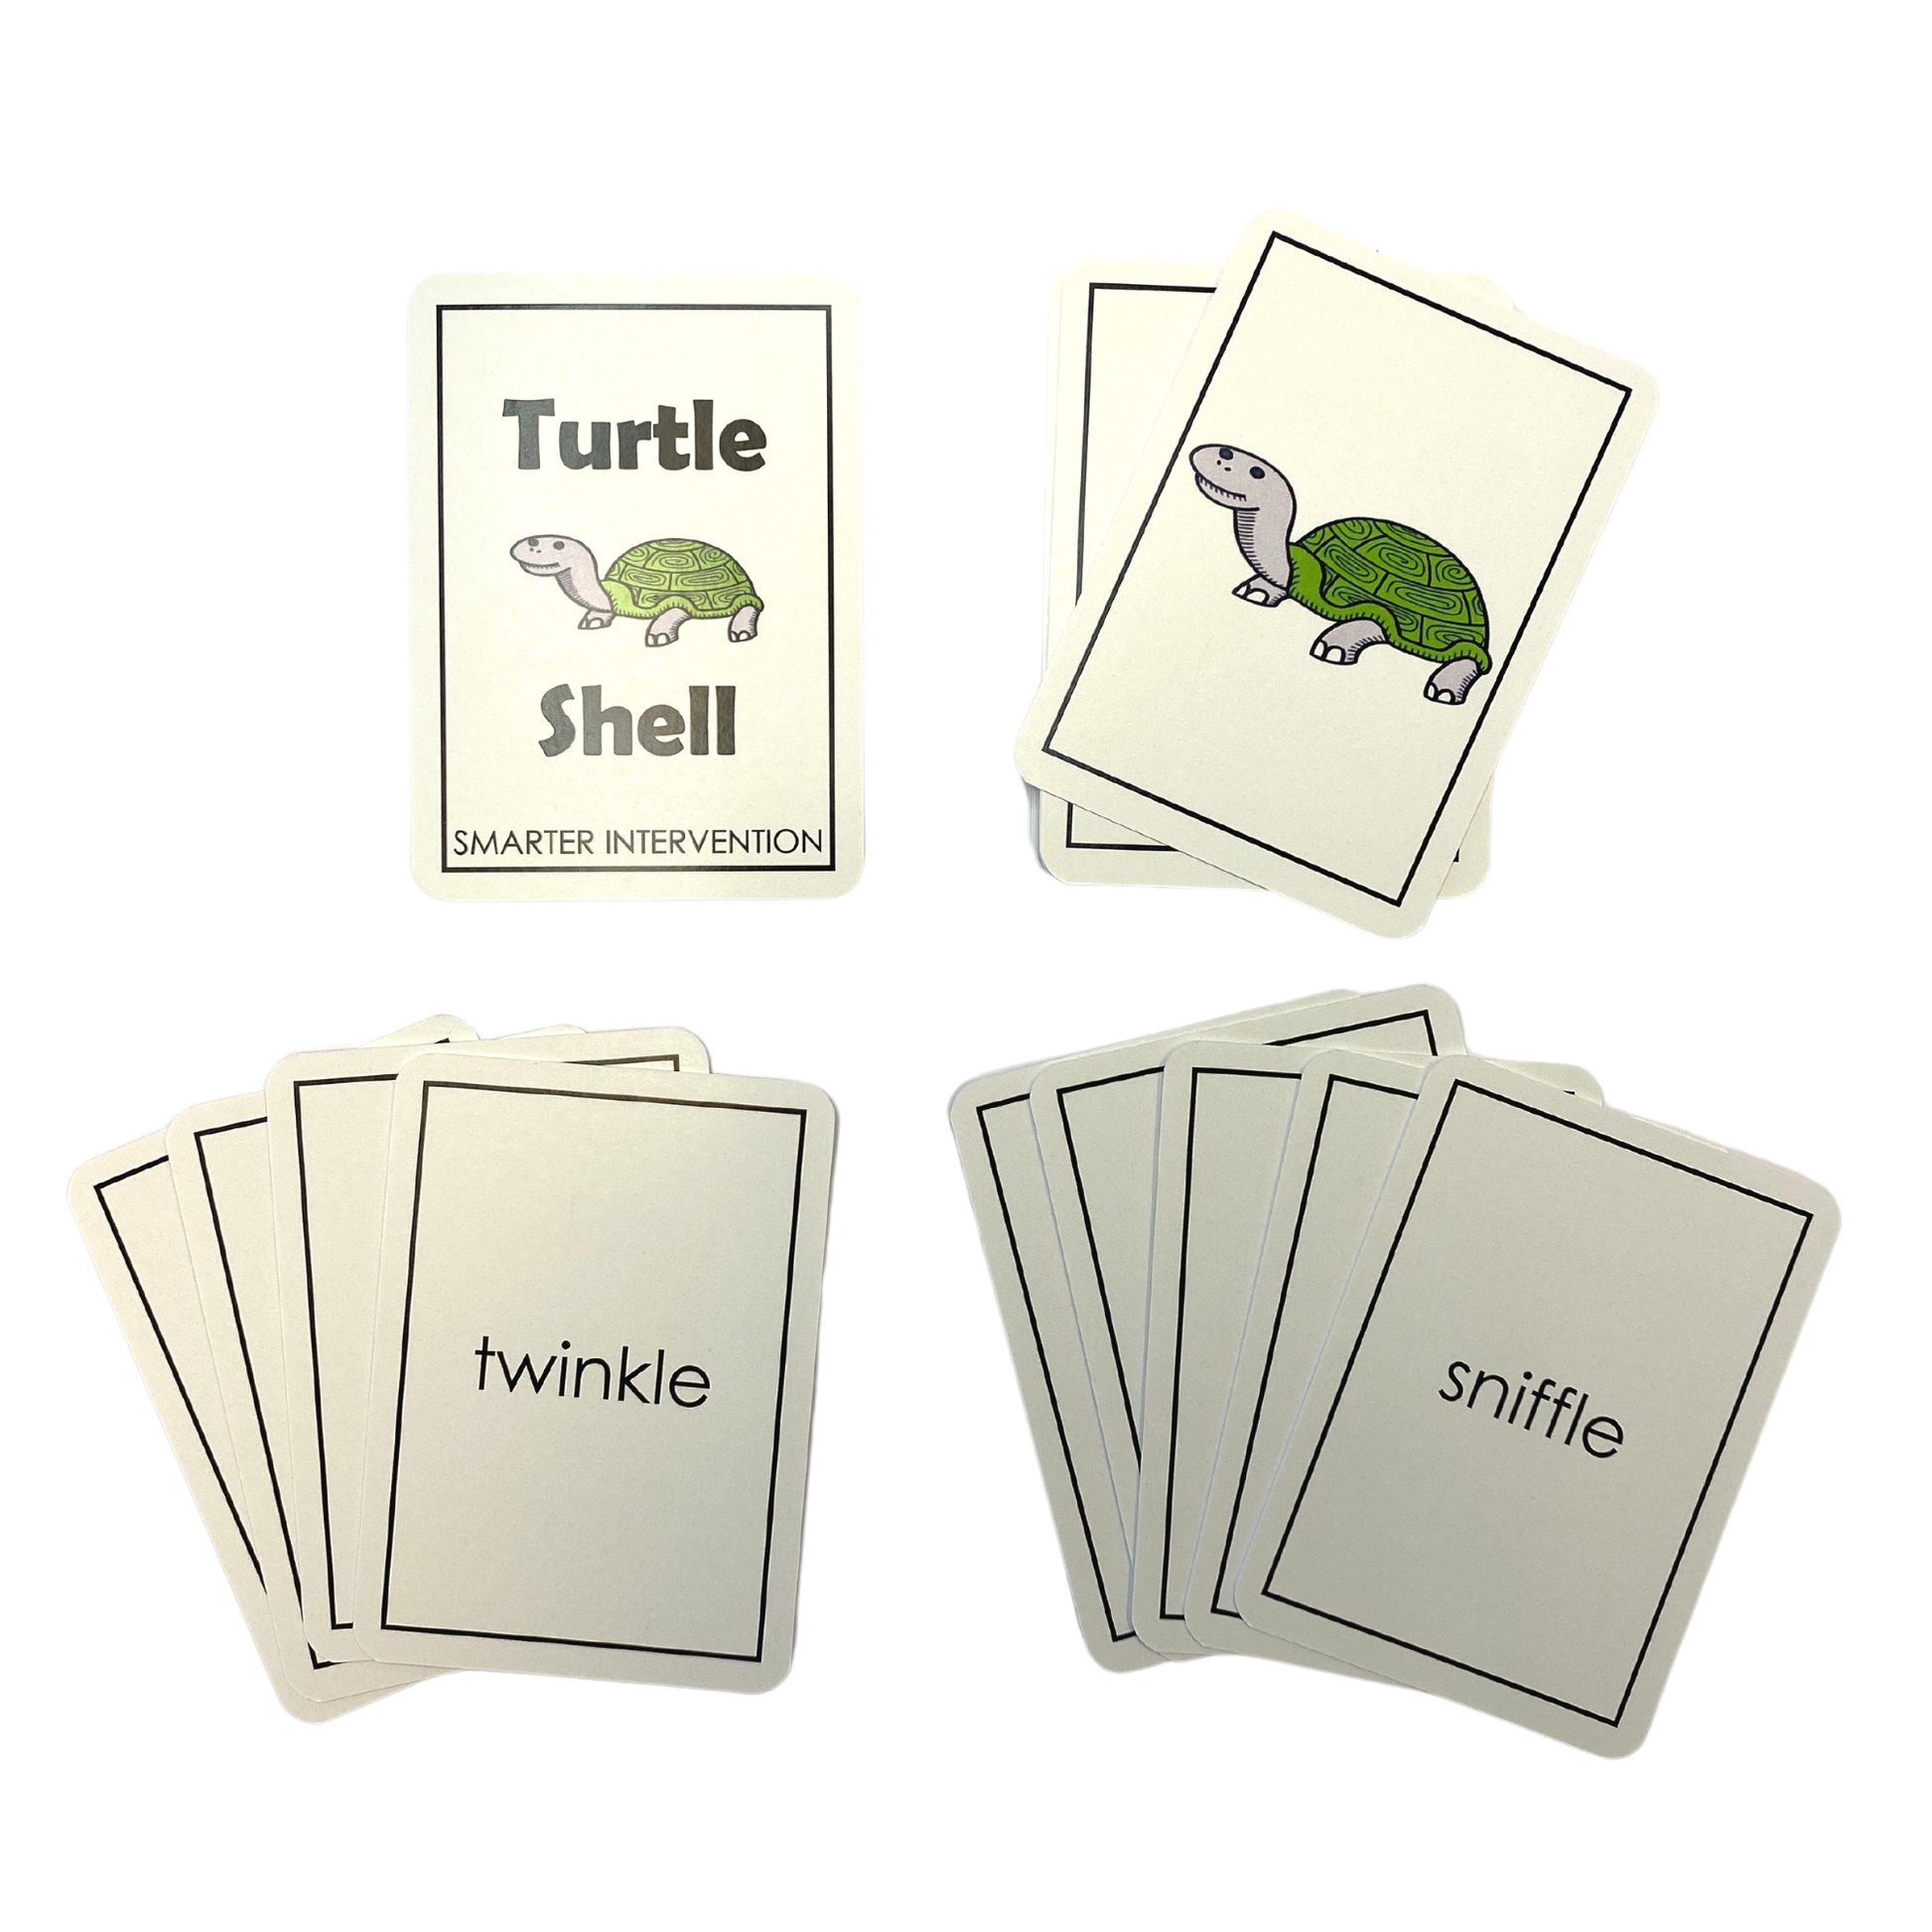 Use the Turtle Division game cards as a syllable division review drill in small group interventions or as a literacy center activity. This game helps students strengthen their reading skills, build their vocabulary, and improve their comprehension in a fun and interactive way. It is designed to reinforce key concepts in a way that is engaging and memorable.